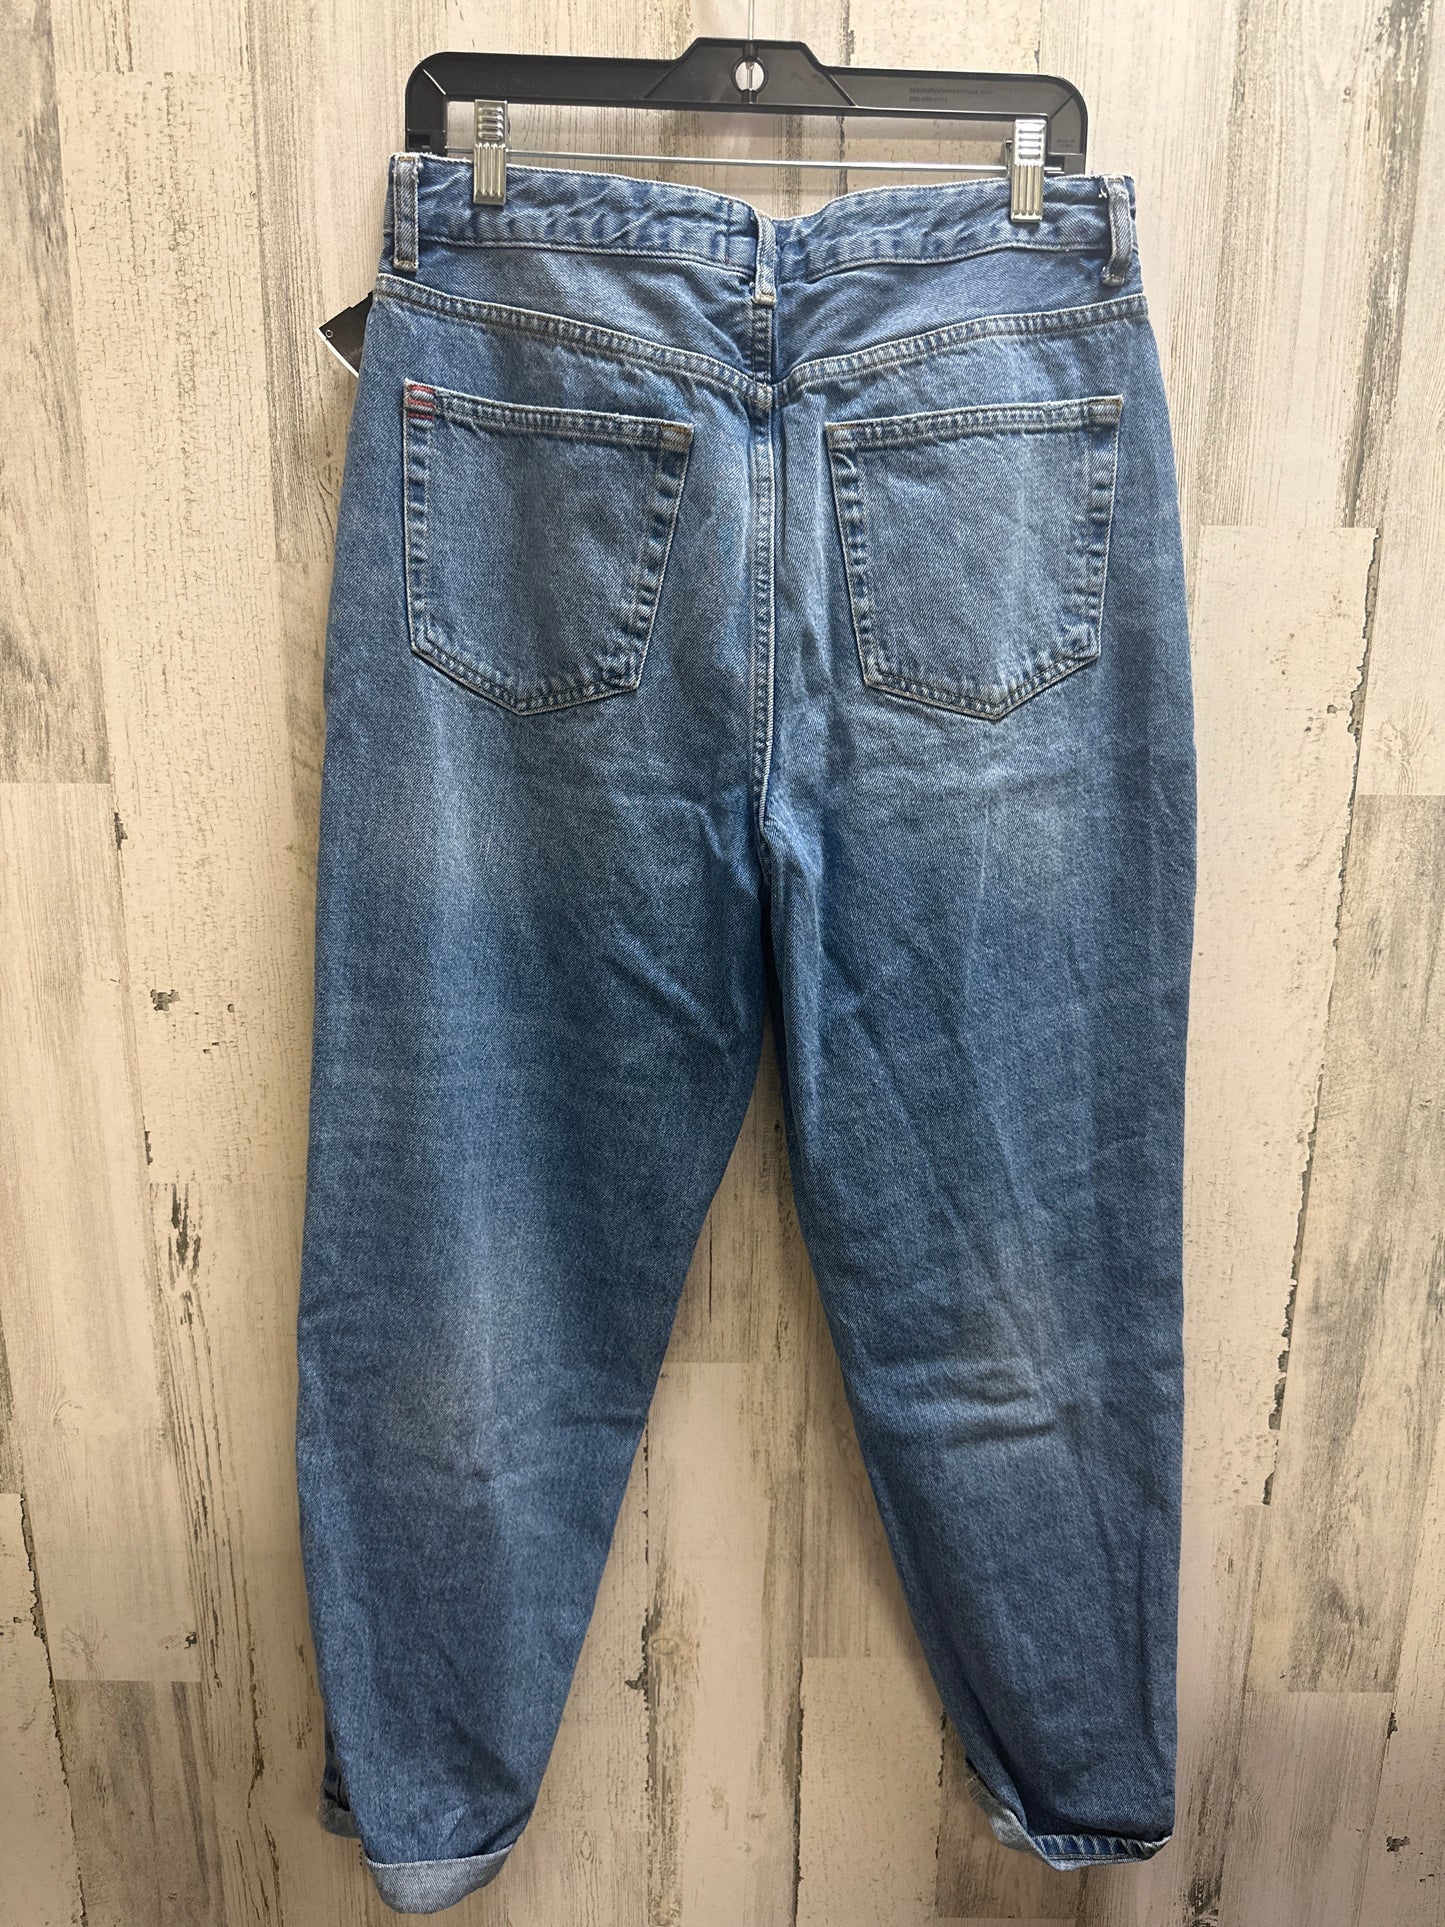 Jeans Boyfriend By Urban Outfitters  Size: 12